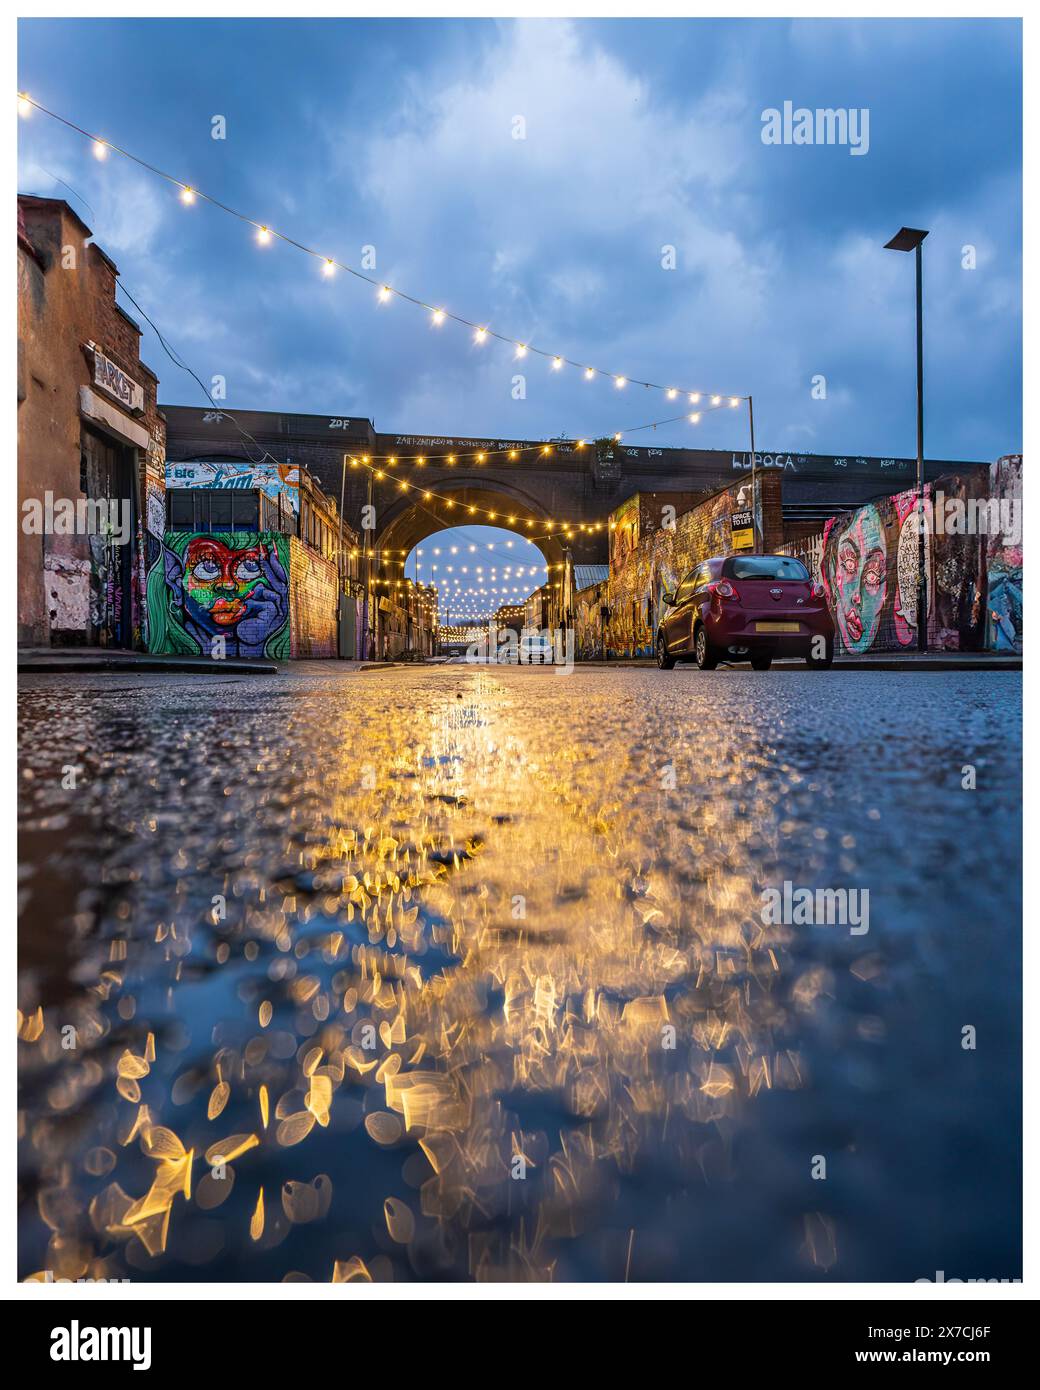 Digbeth Urban street at night on a wet day Stock Photo